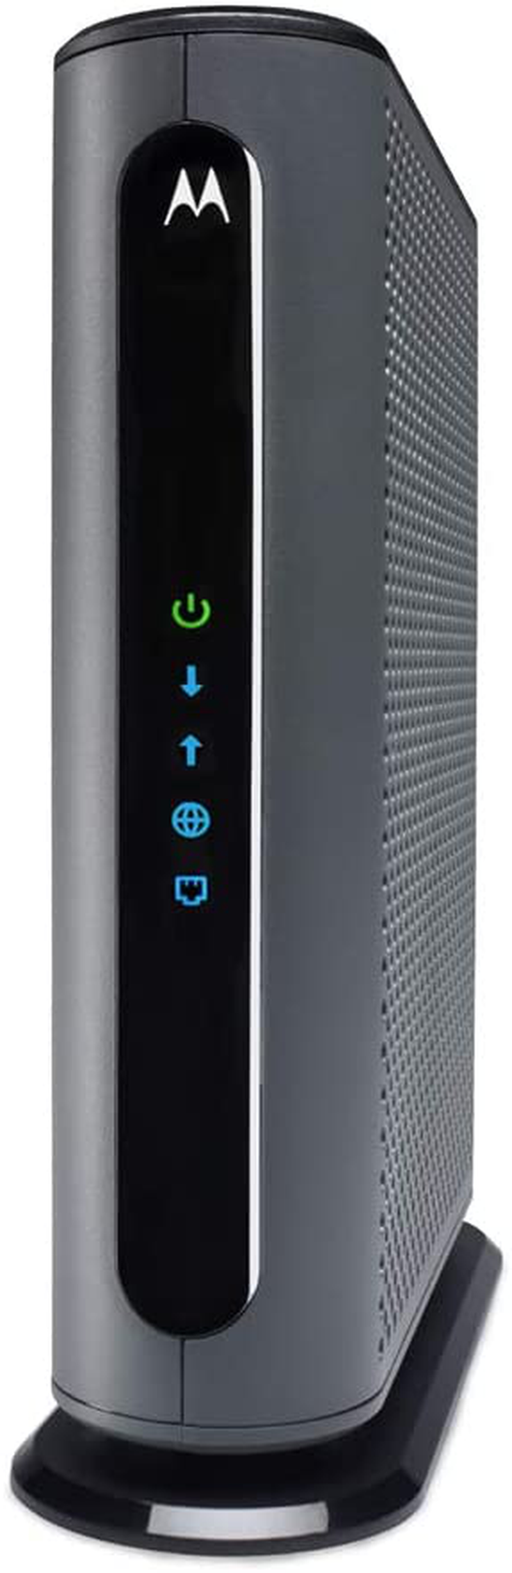 Motorola MB8611 DOCSIS 3.1 Multi-Gig Cable Modem | Pairs with Any WiFi Router | Approved for Comcast Xfinity Gigabit, Cox Gigablast, Spectrum, and More | 2.5 Gbps Ethernet Port